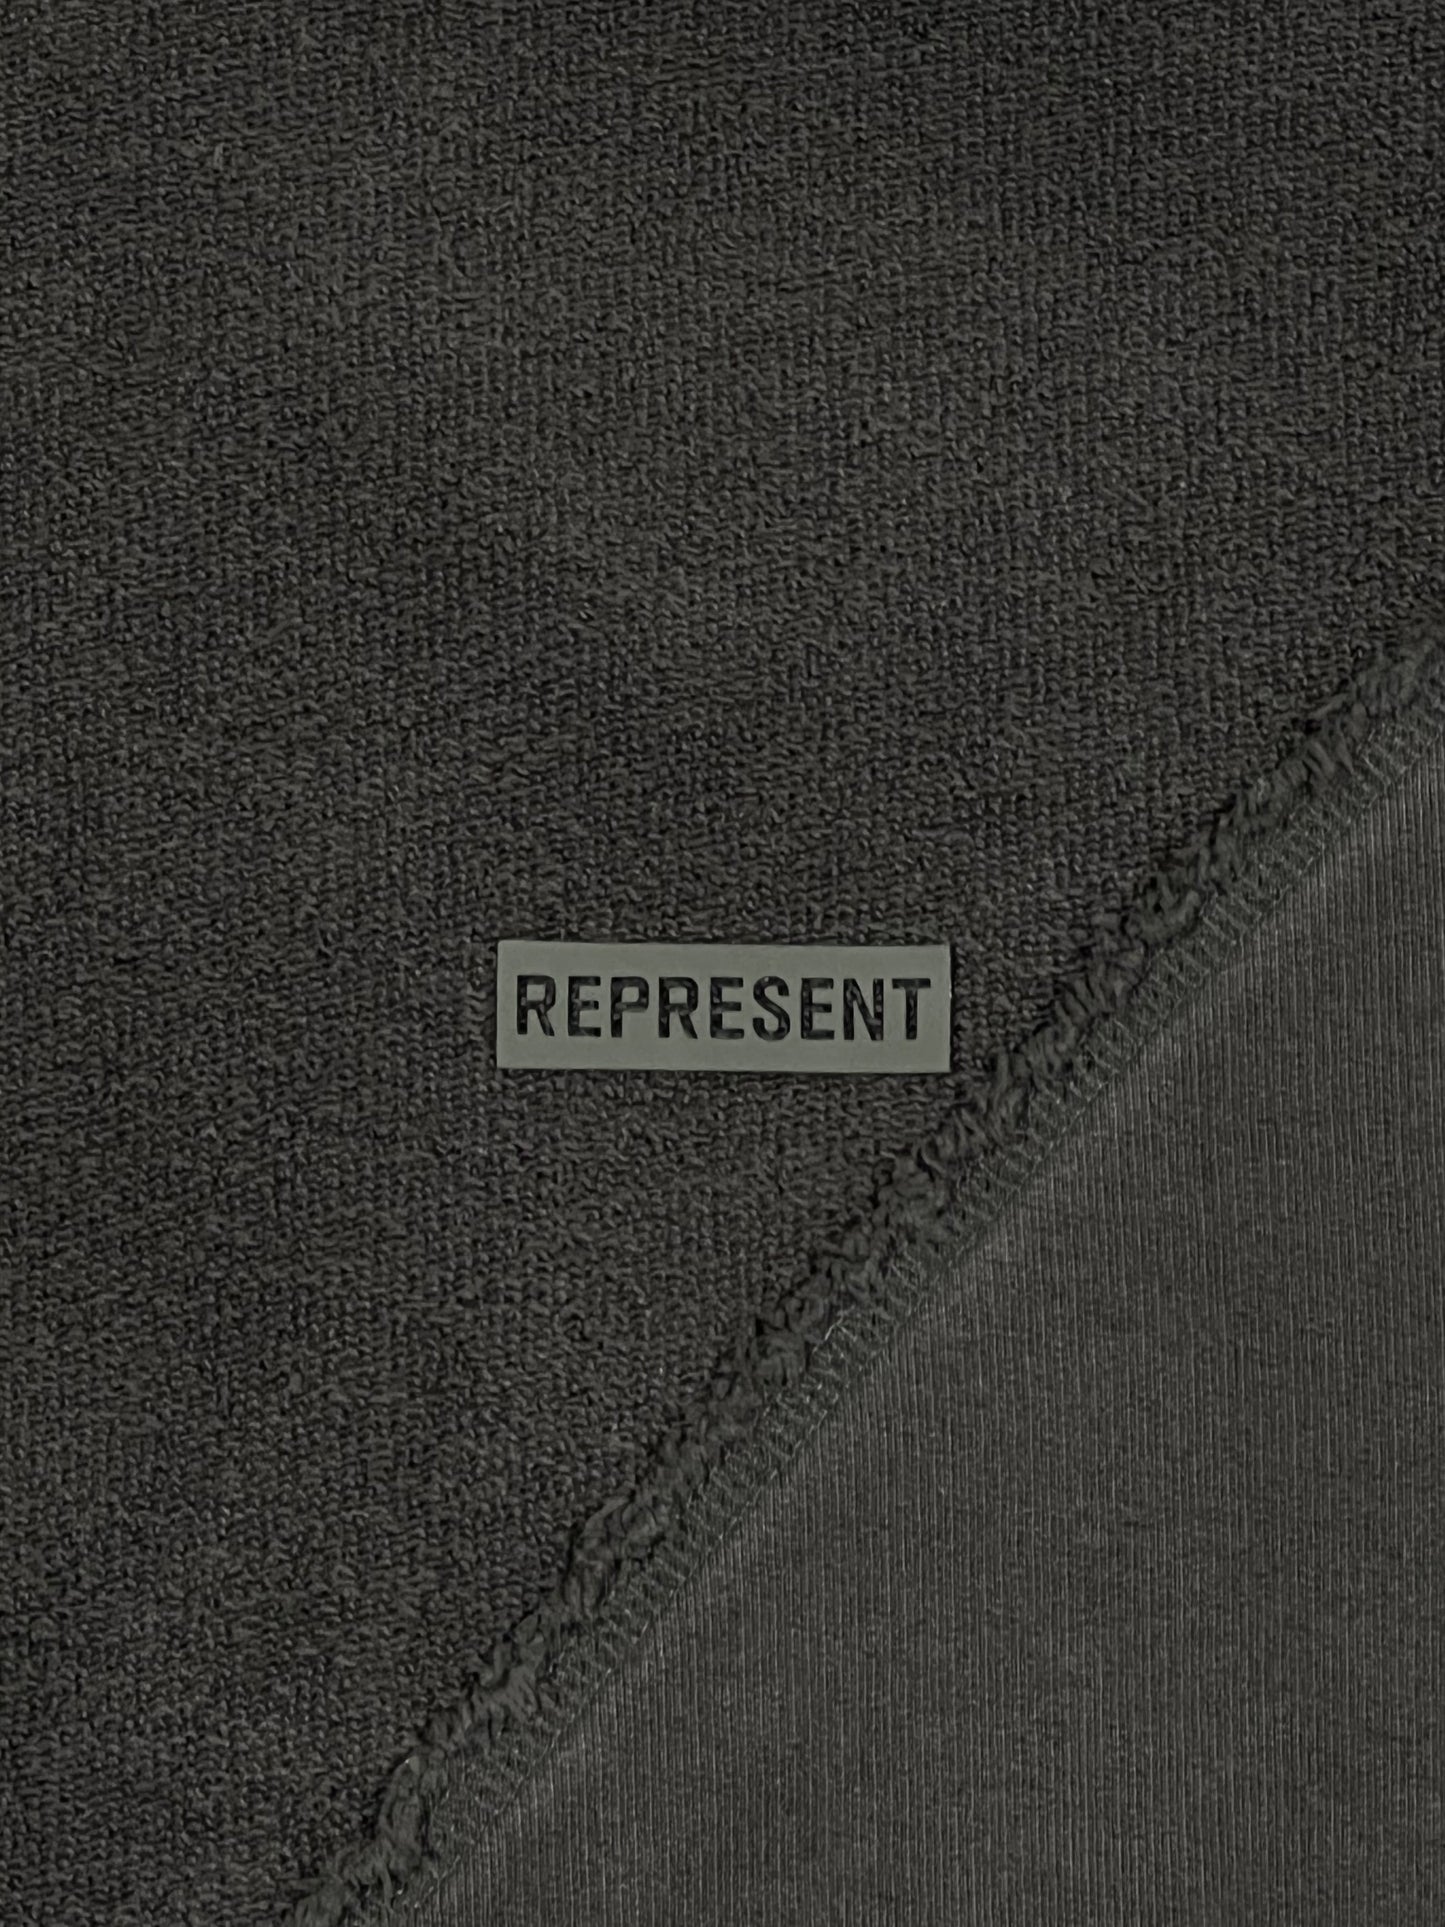 A close up of a black cotton sweatshirt with the word "REPRESENT" on it.